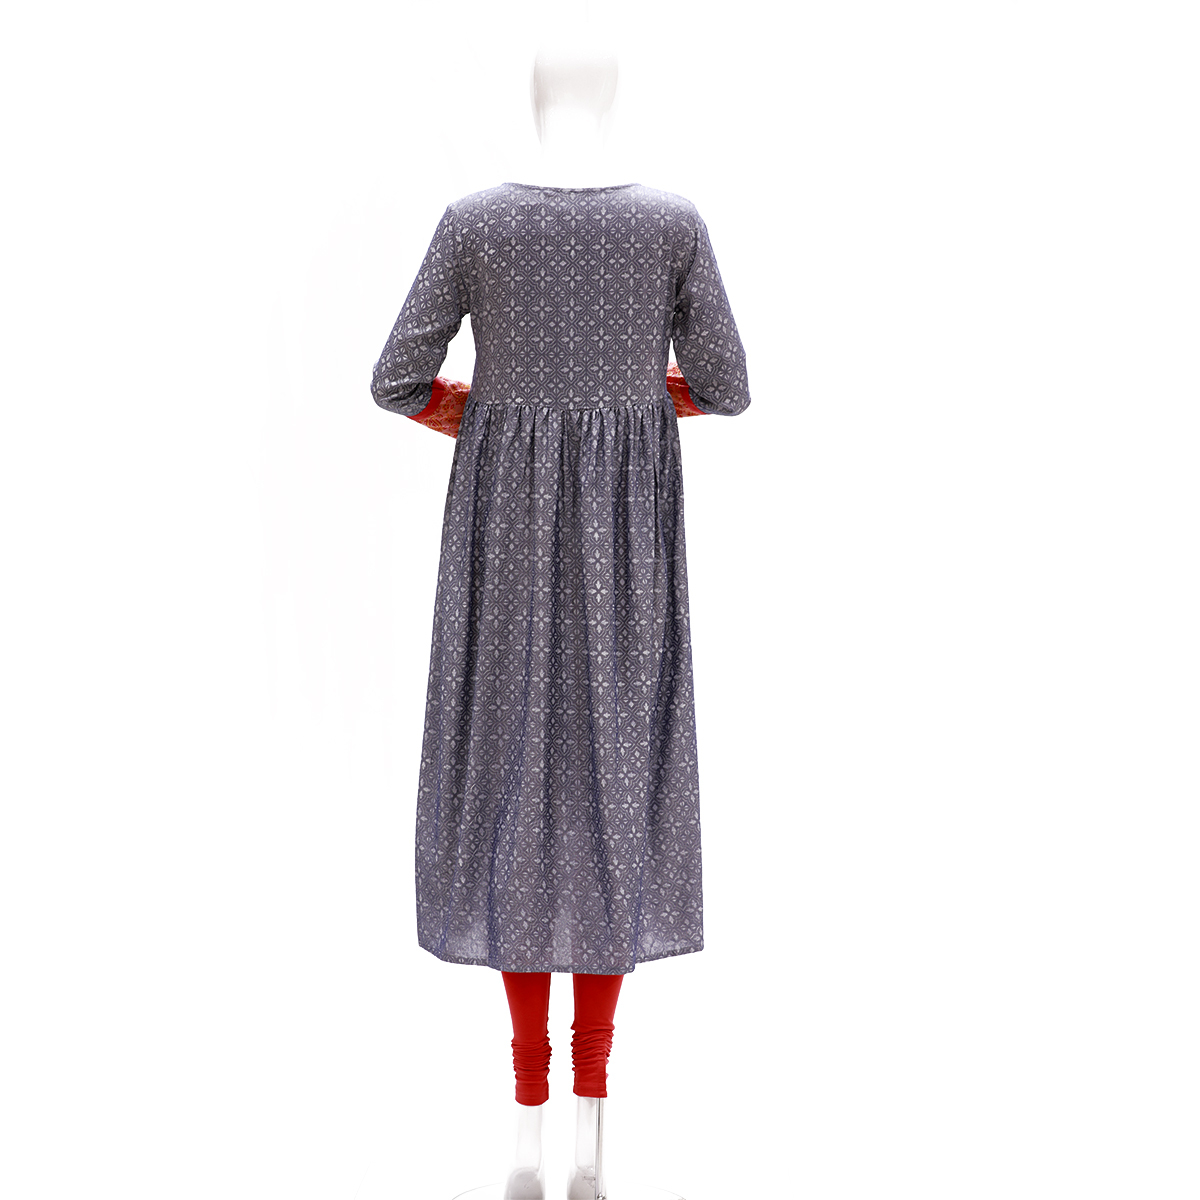 Desi Belle Flared Kurta With Waist Gathers And Tape Details On Waist And Sleeve-Blue